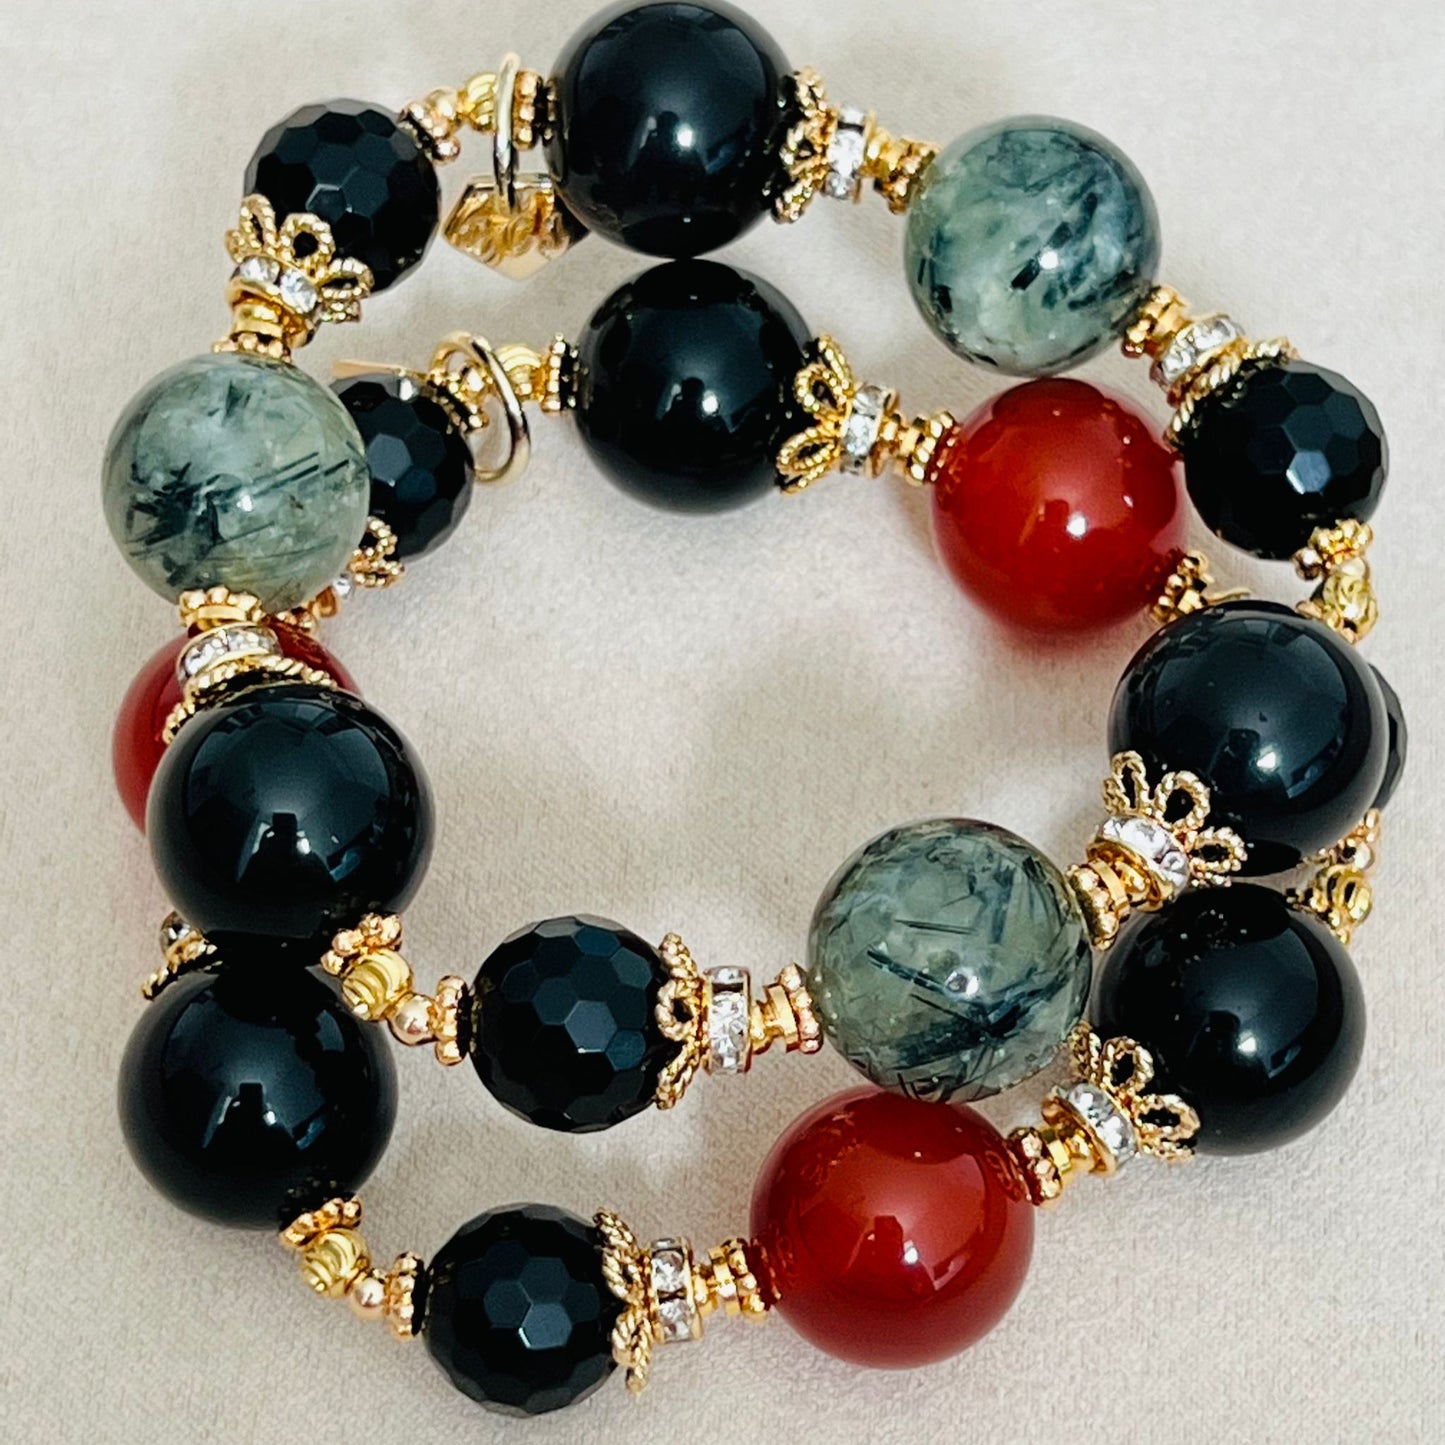 Protective Red Agate Bracelet